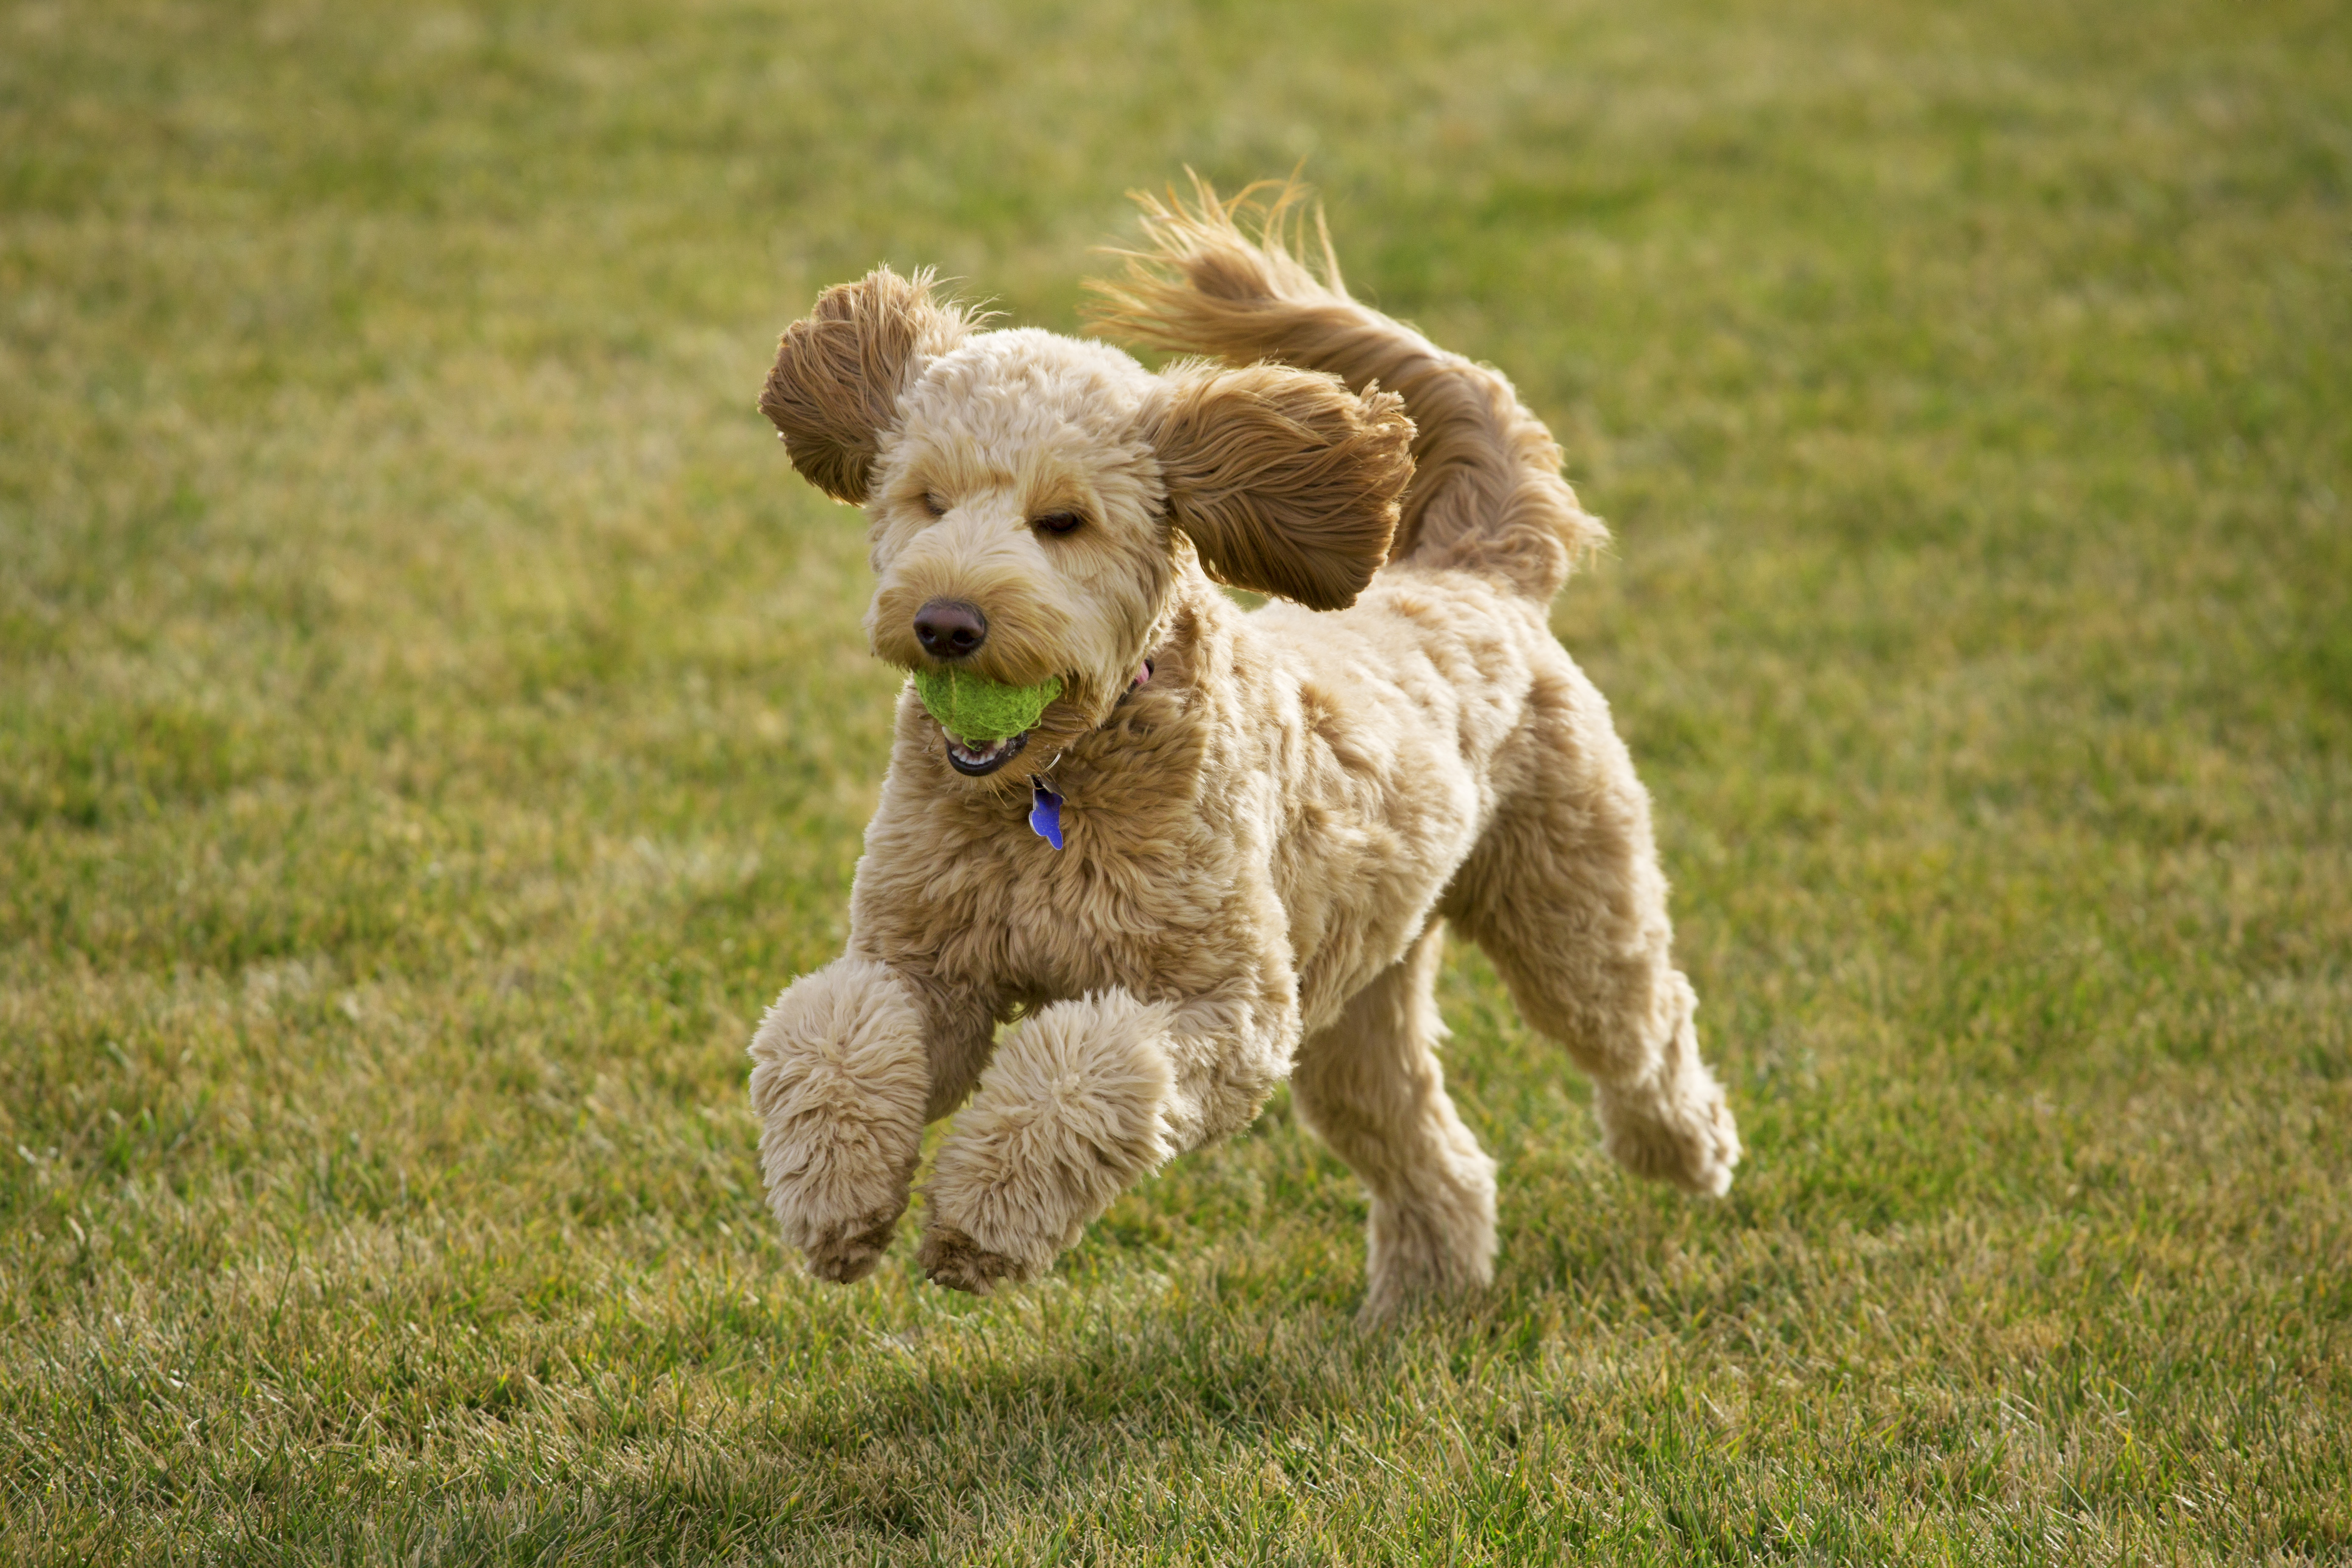 A cute goldendoodle dog runs across a grassy lawn with a ball.